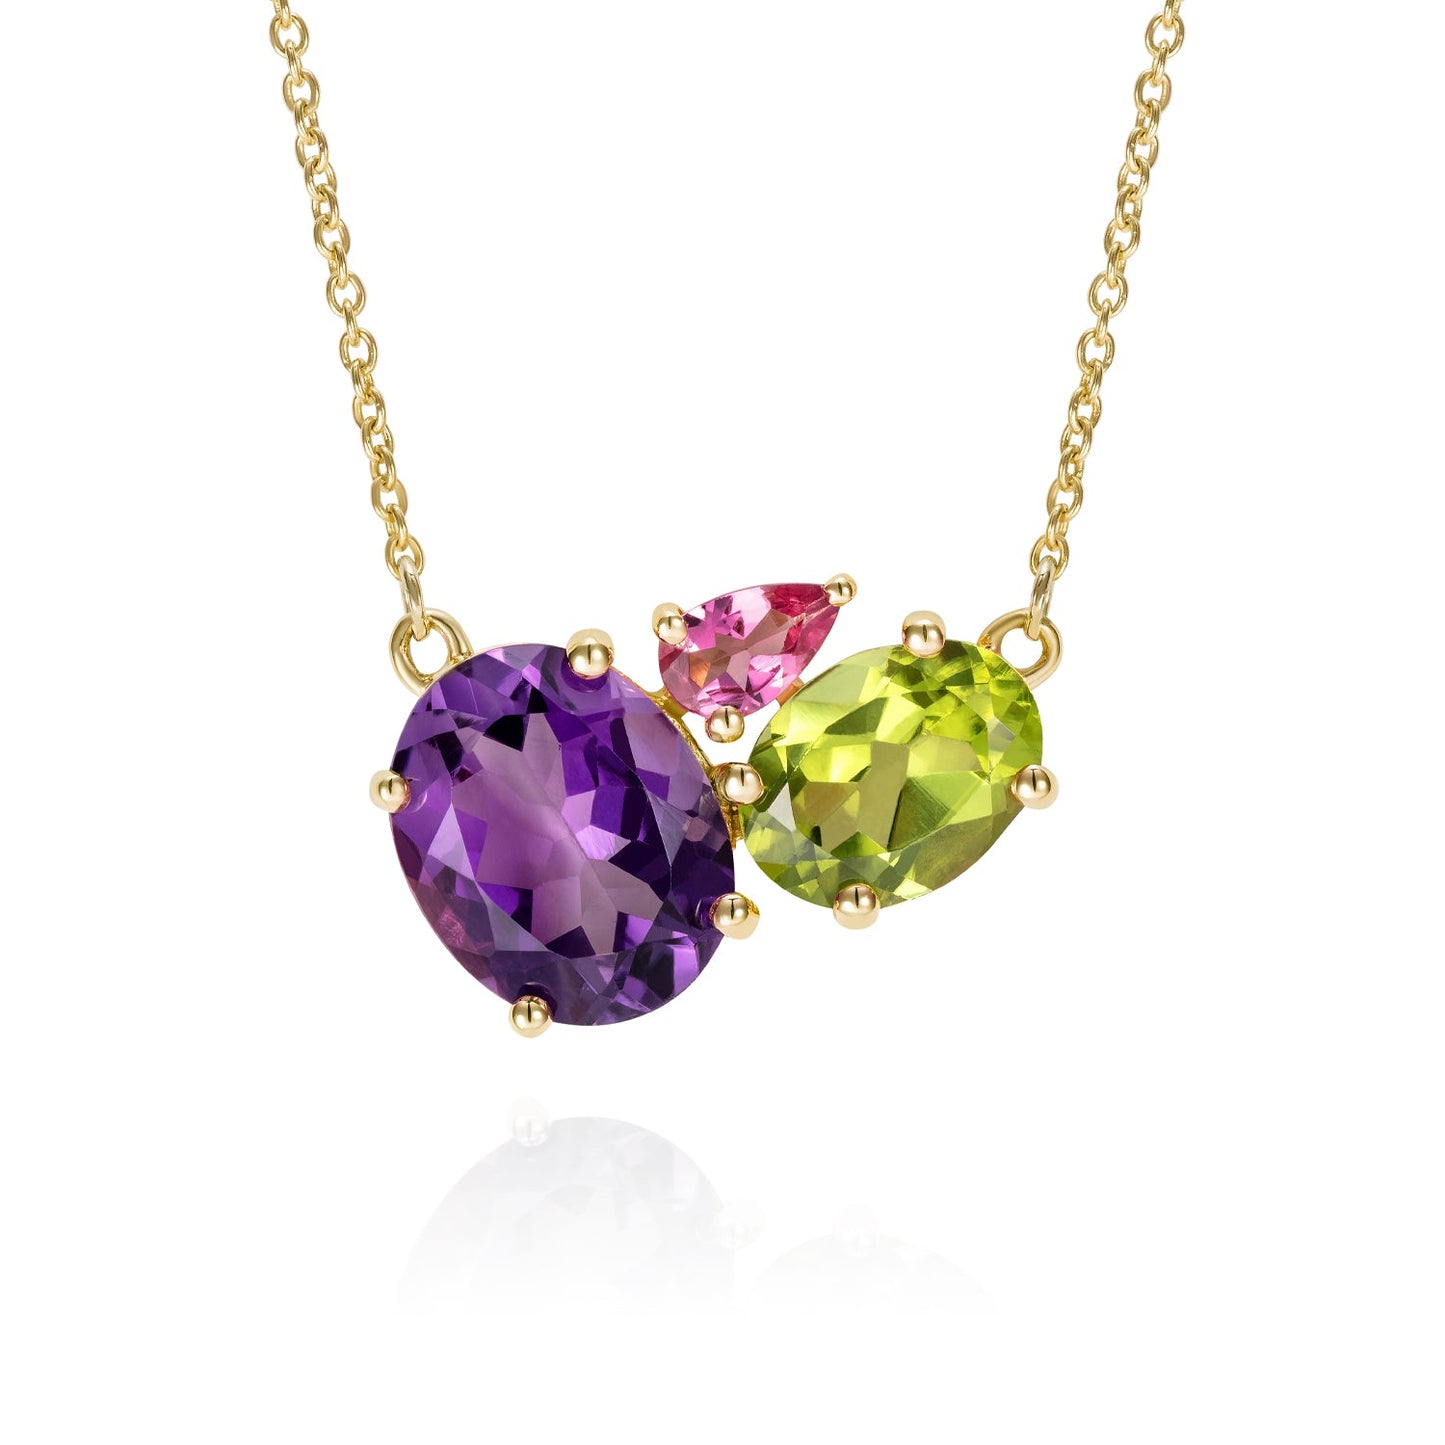 British Jewellers designed London-made custom gold jewellery - Purple Amethyst Gold Cluster Necklace with Peridot and Pink Tourmaline – Como Collection, Augustine Jewellery, British Jewellers, Gemstone Jewellery, Luxury Jewellery London.